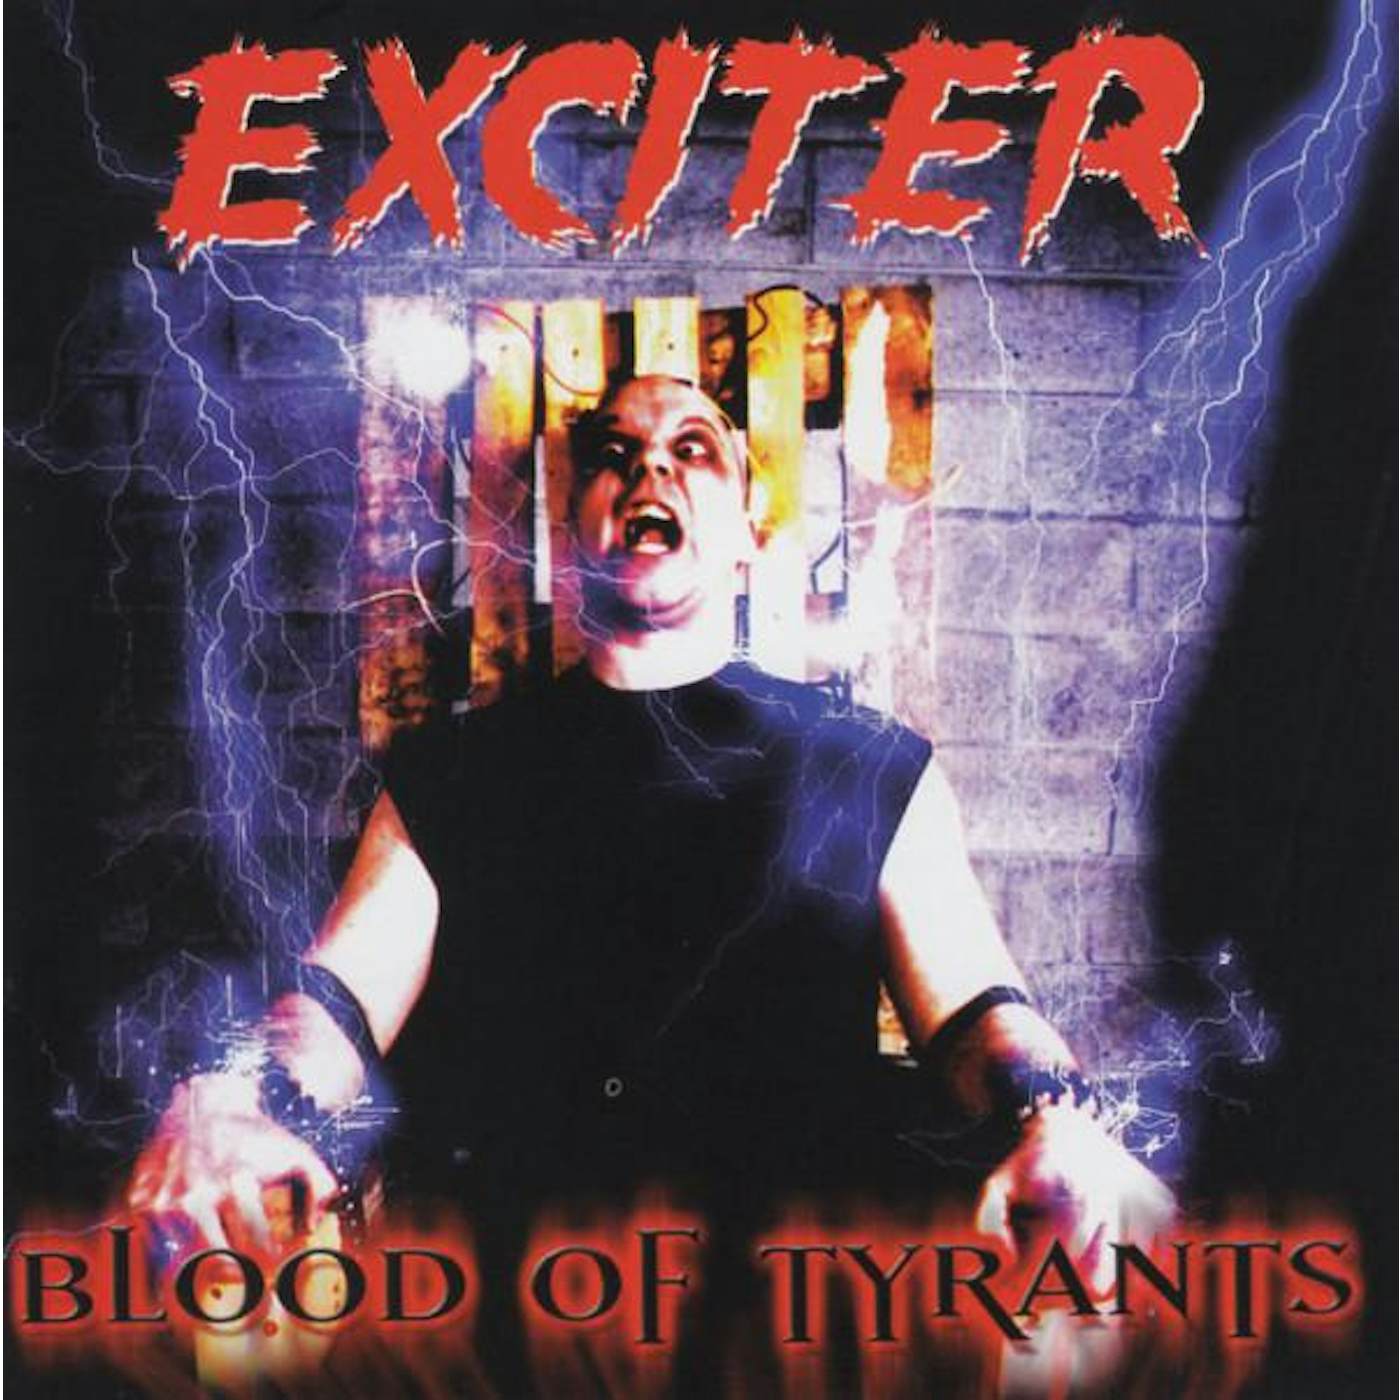 Exciter BLOOD OF TYRANTS (RE-ISSUE) CD